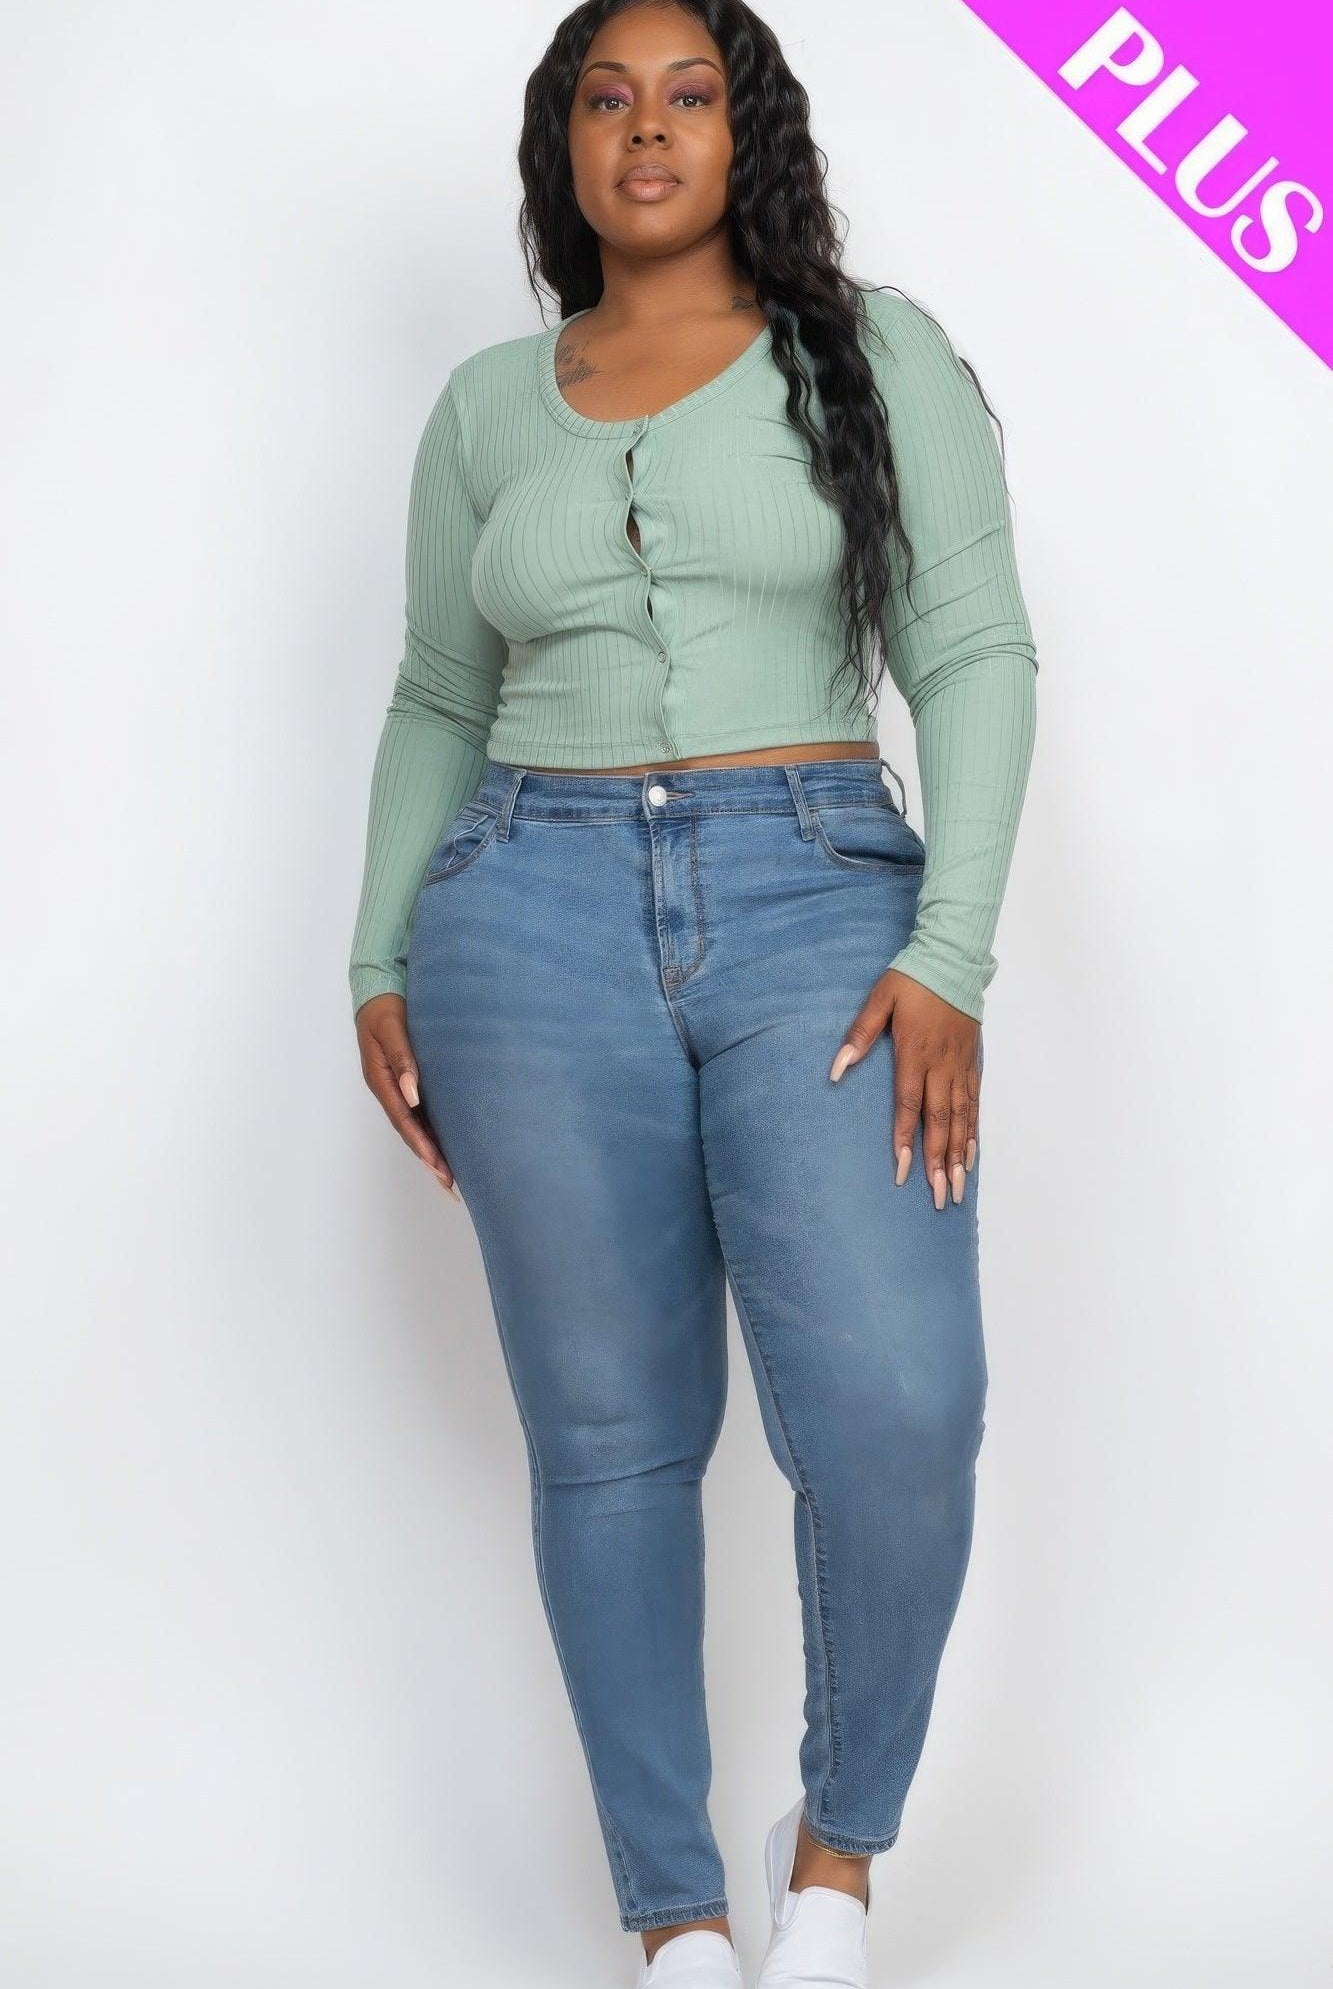 Women's Shirts Plus Size Button Up Cropped Top